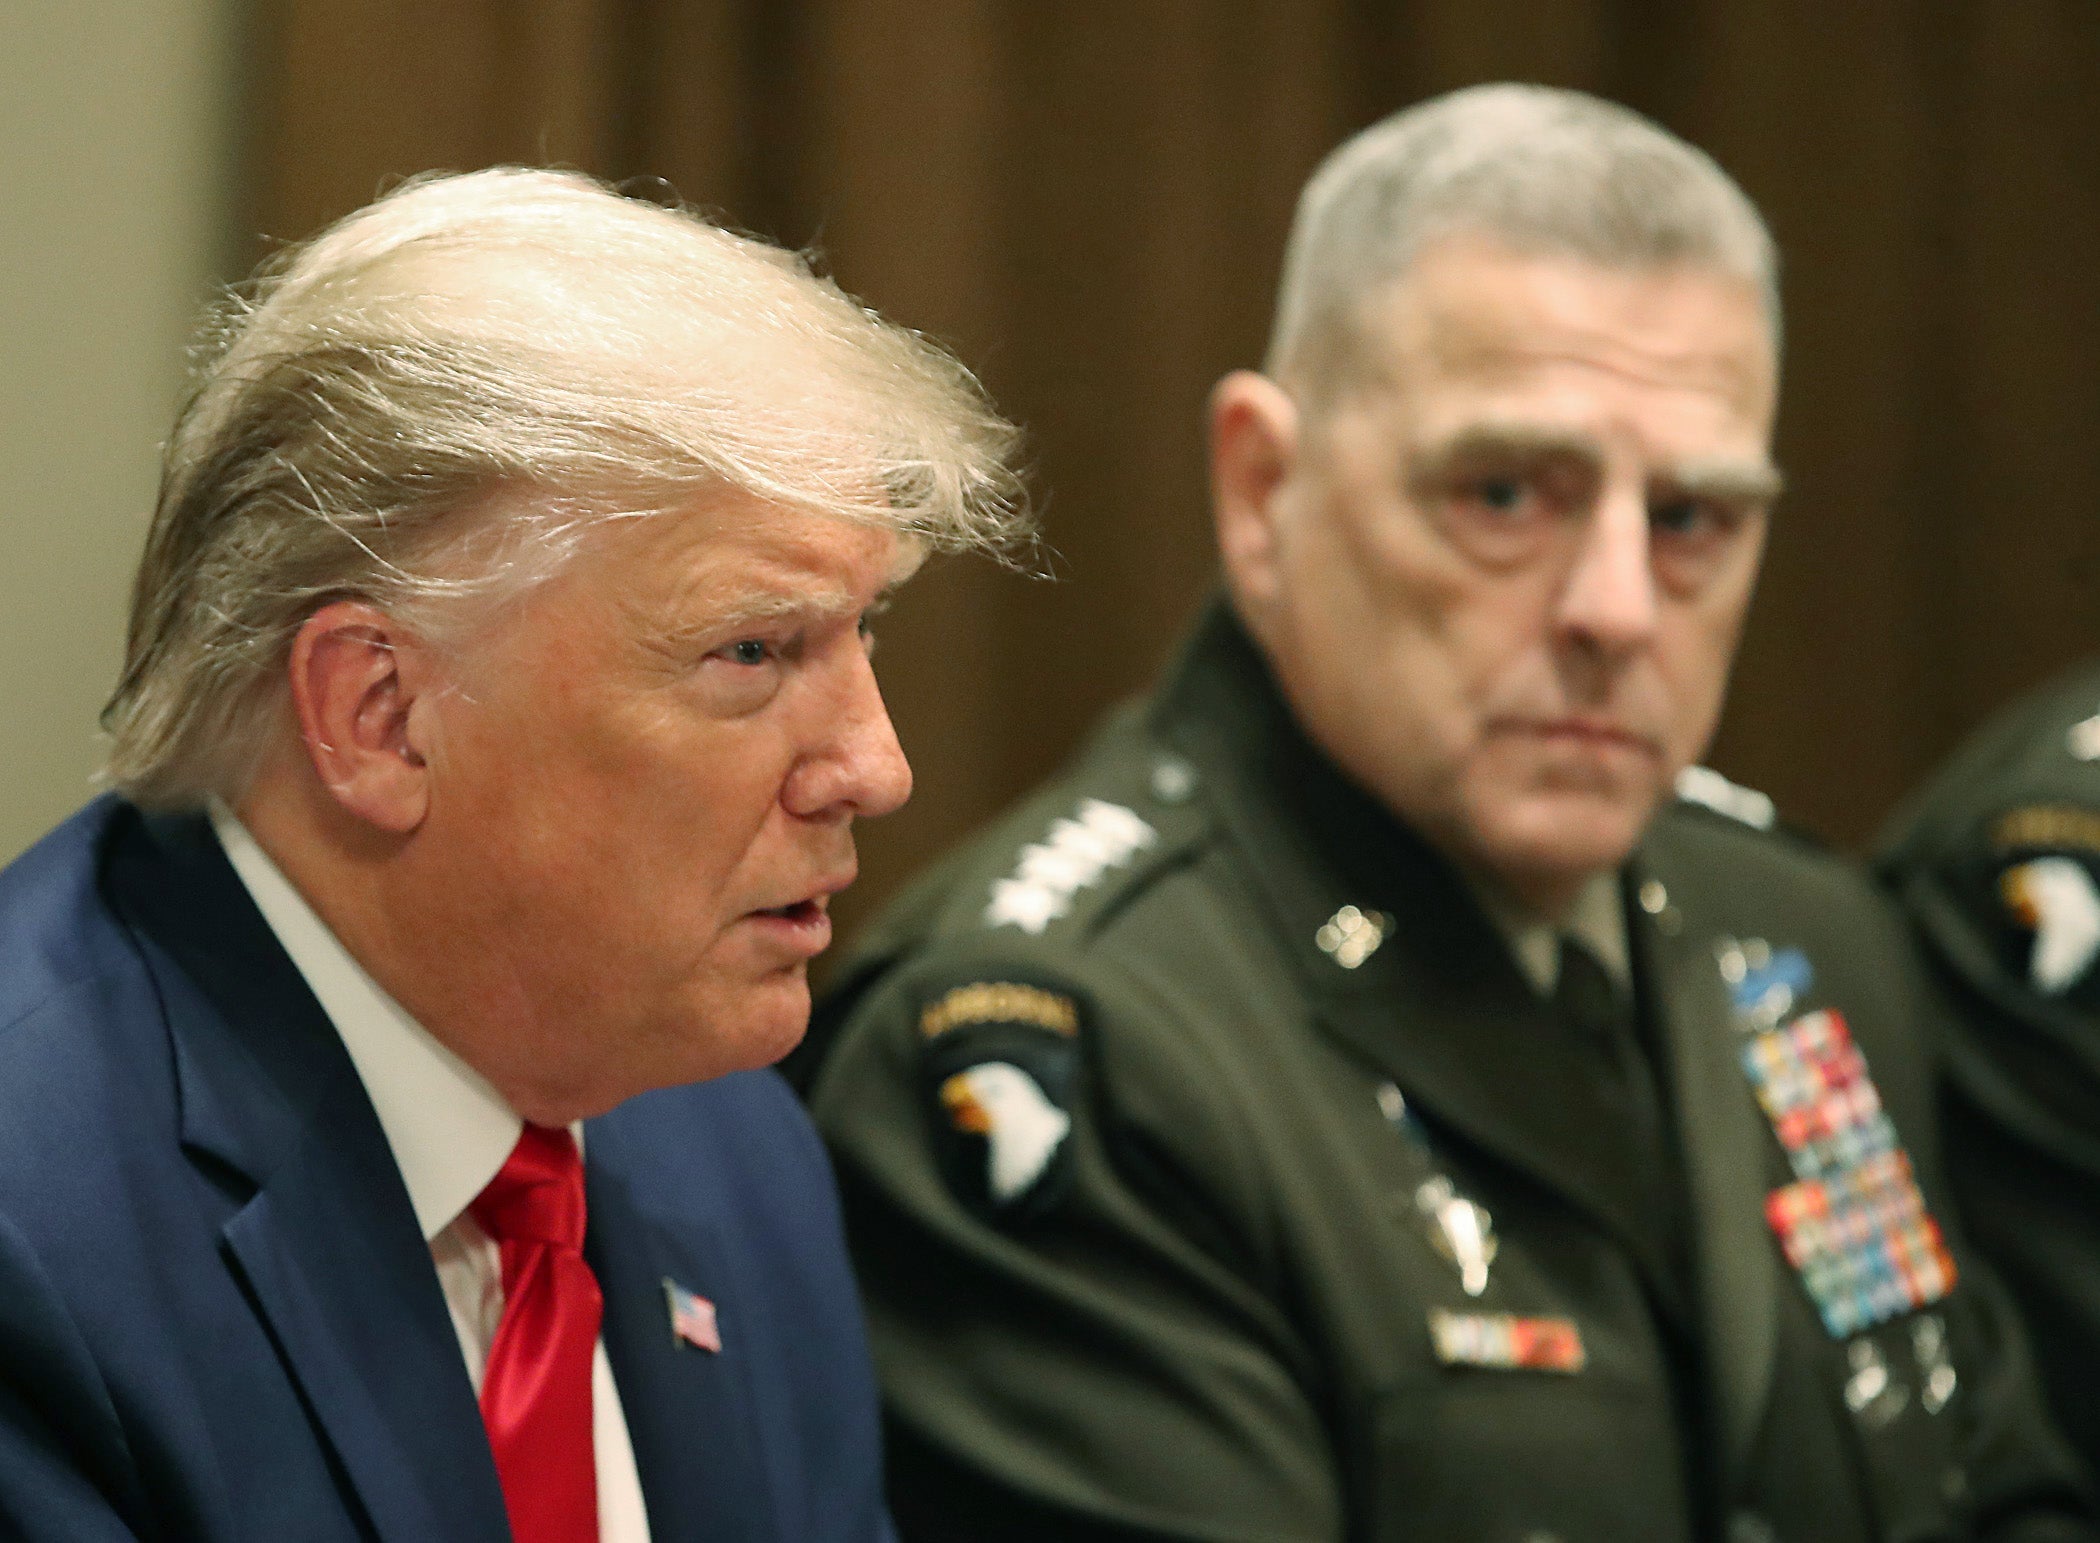 Donald Trump speaks as Joint Chiefs of Staff Chairman, Army Gen. Mark Milley looks on after getting a briefing from senior military leaders in the Cabinet Room at the White House on October 7, 2019 in Washington, DC.